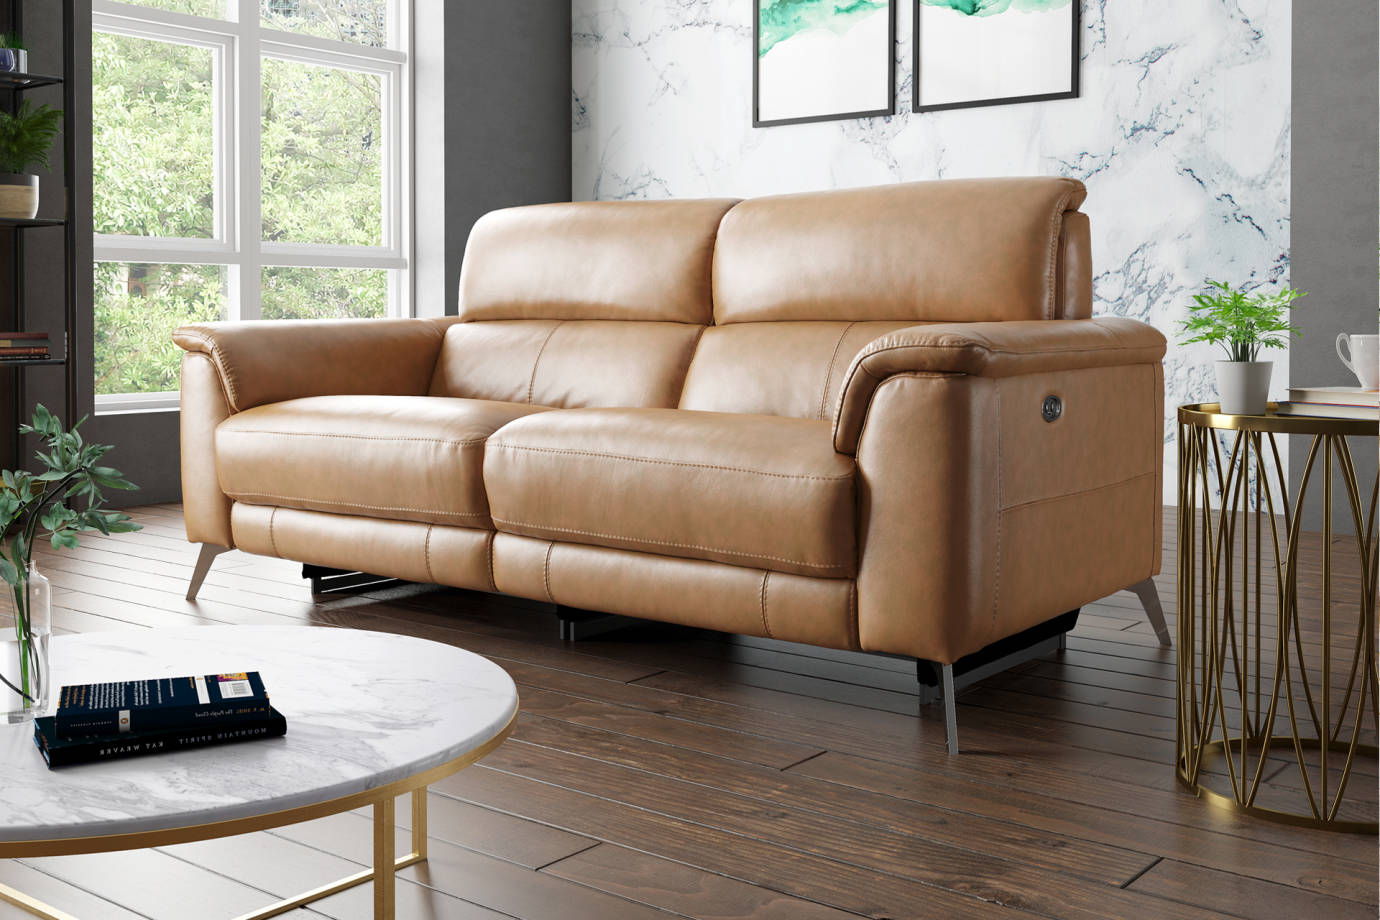 Recliner Sofas Leather Fabric And, Tan Leather Couch Recliner